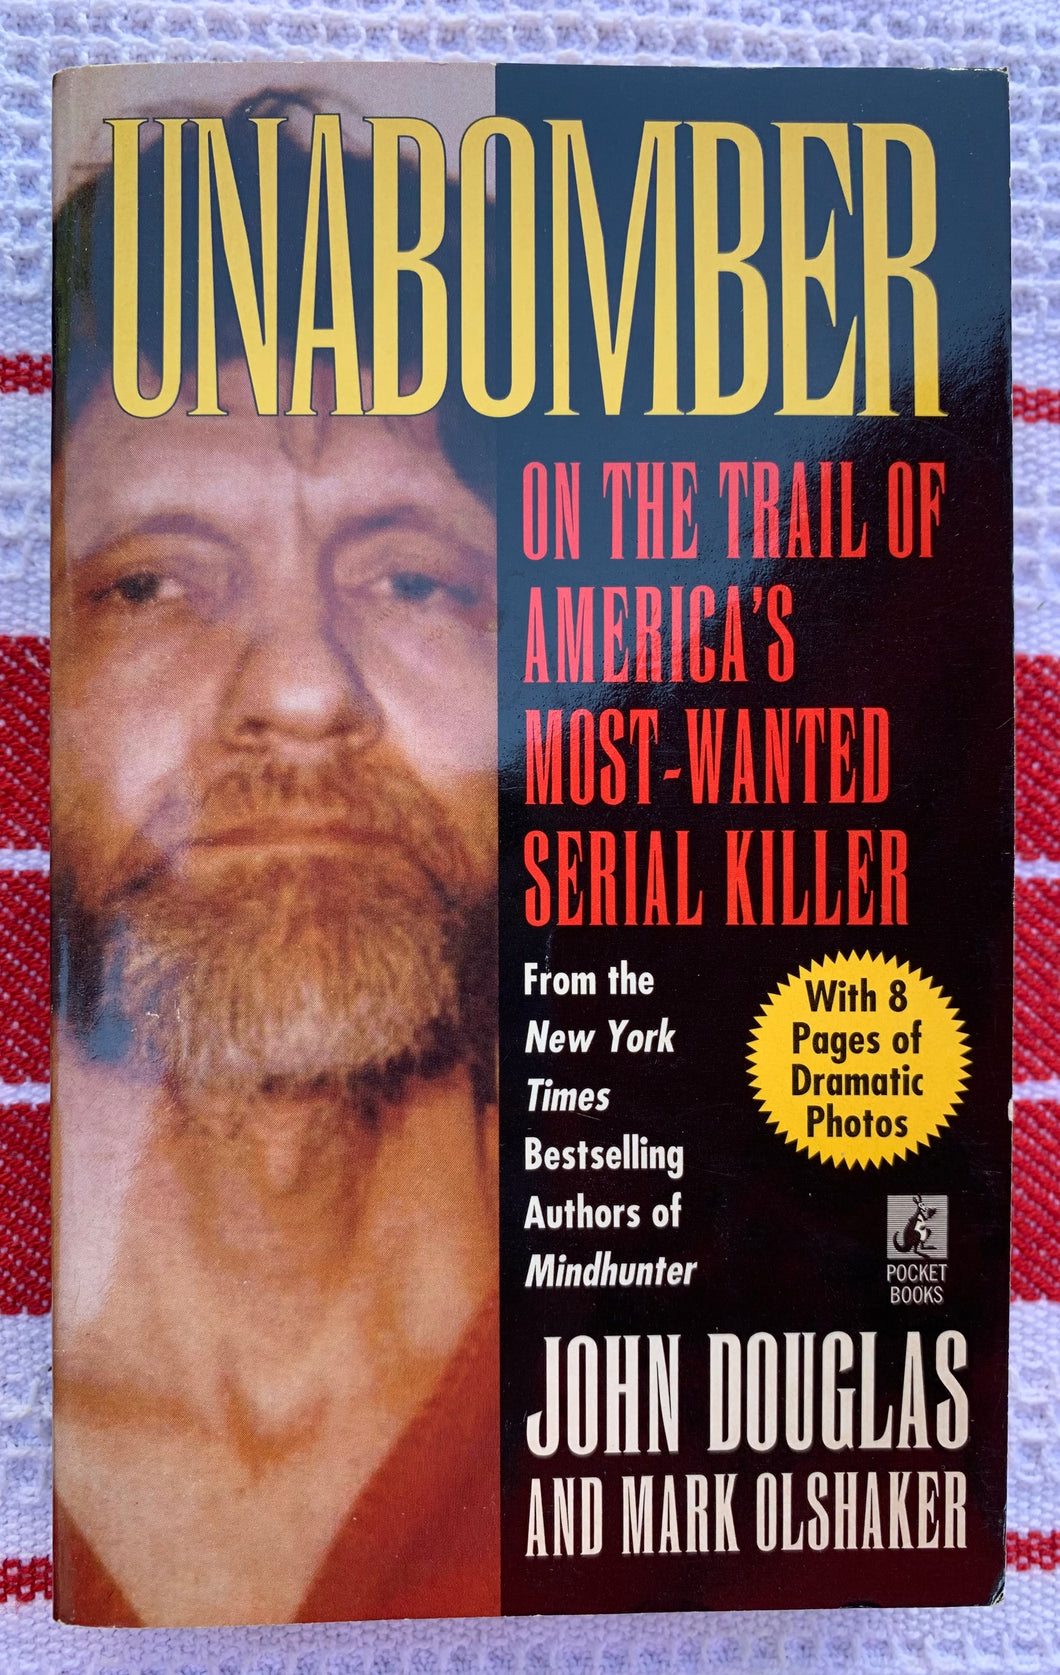 Unabomber: On The Trail Of America's Most-Wanted Serial Killer